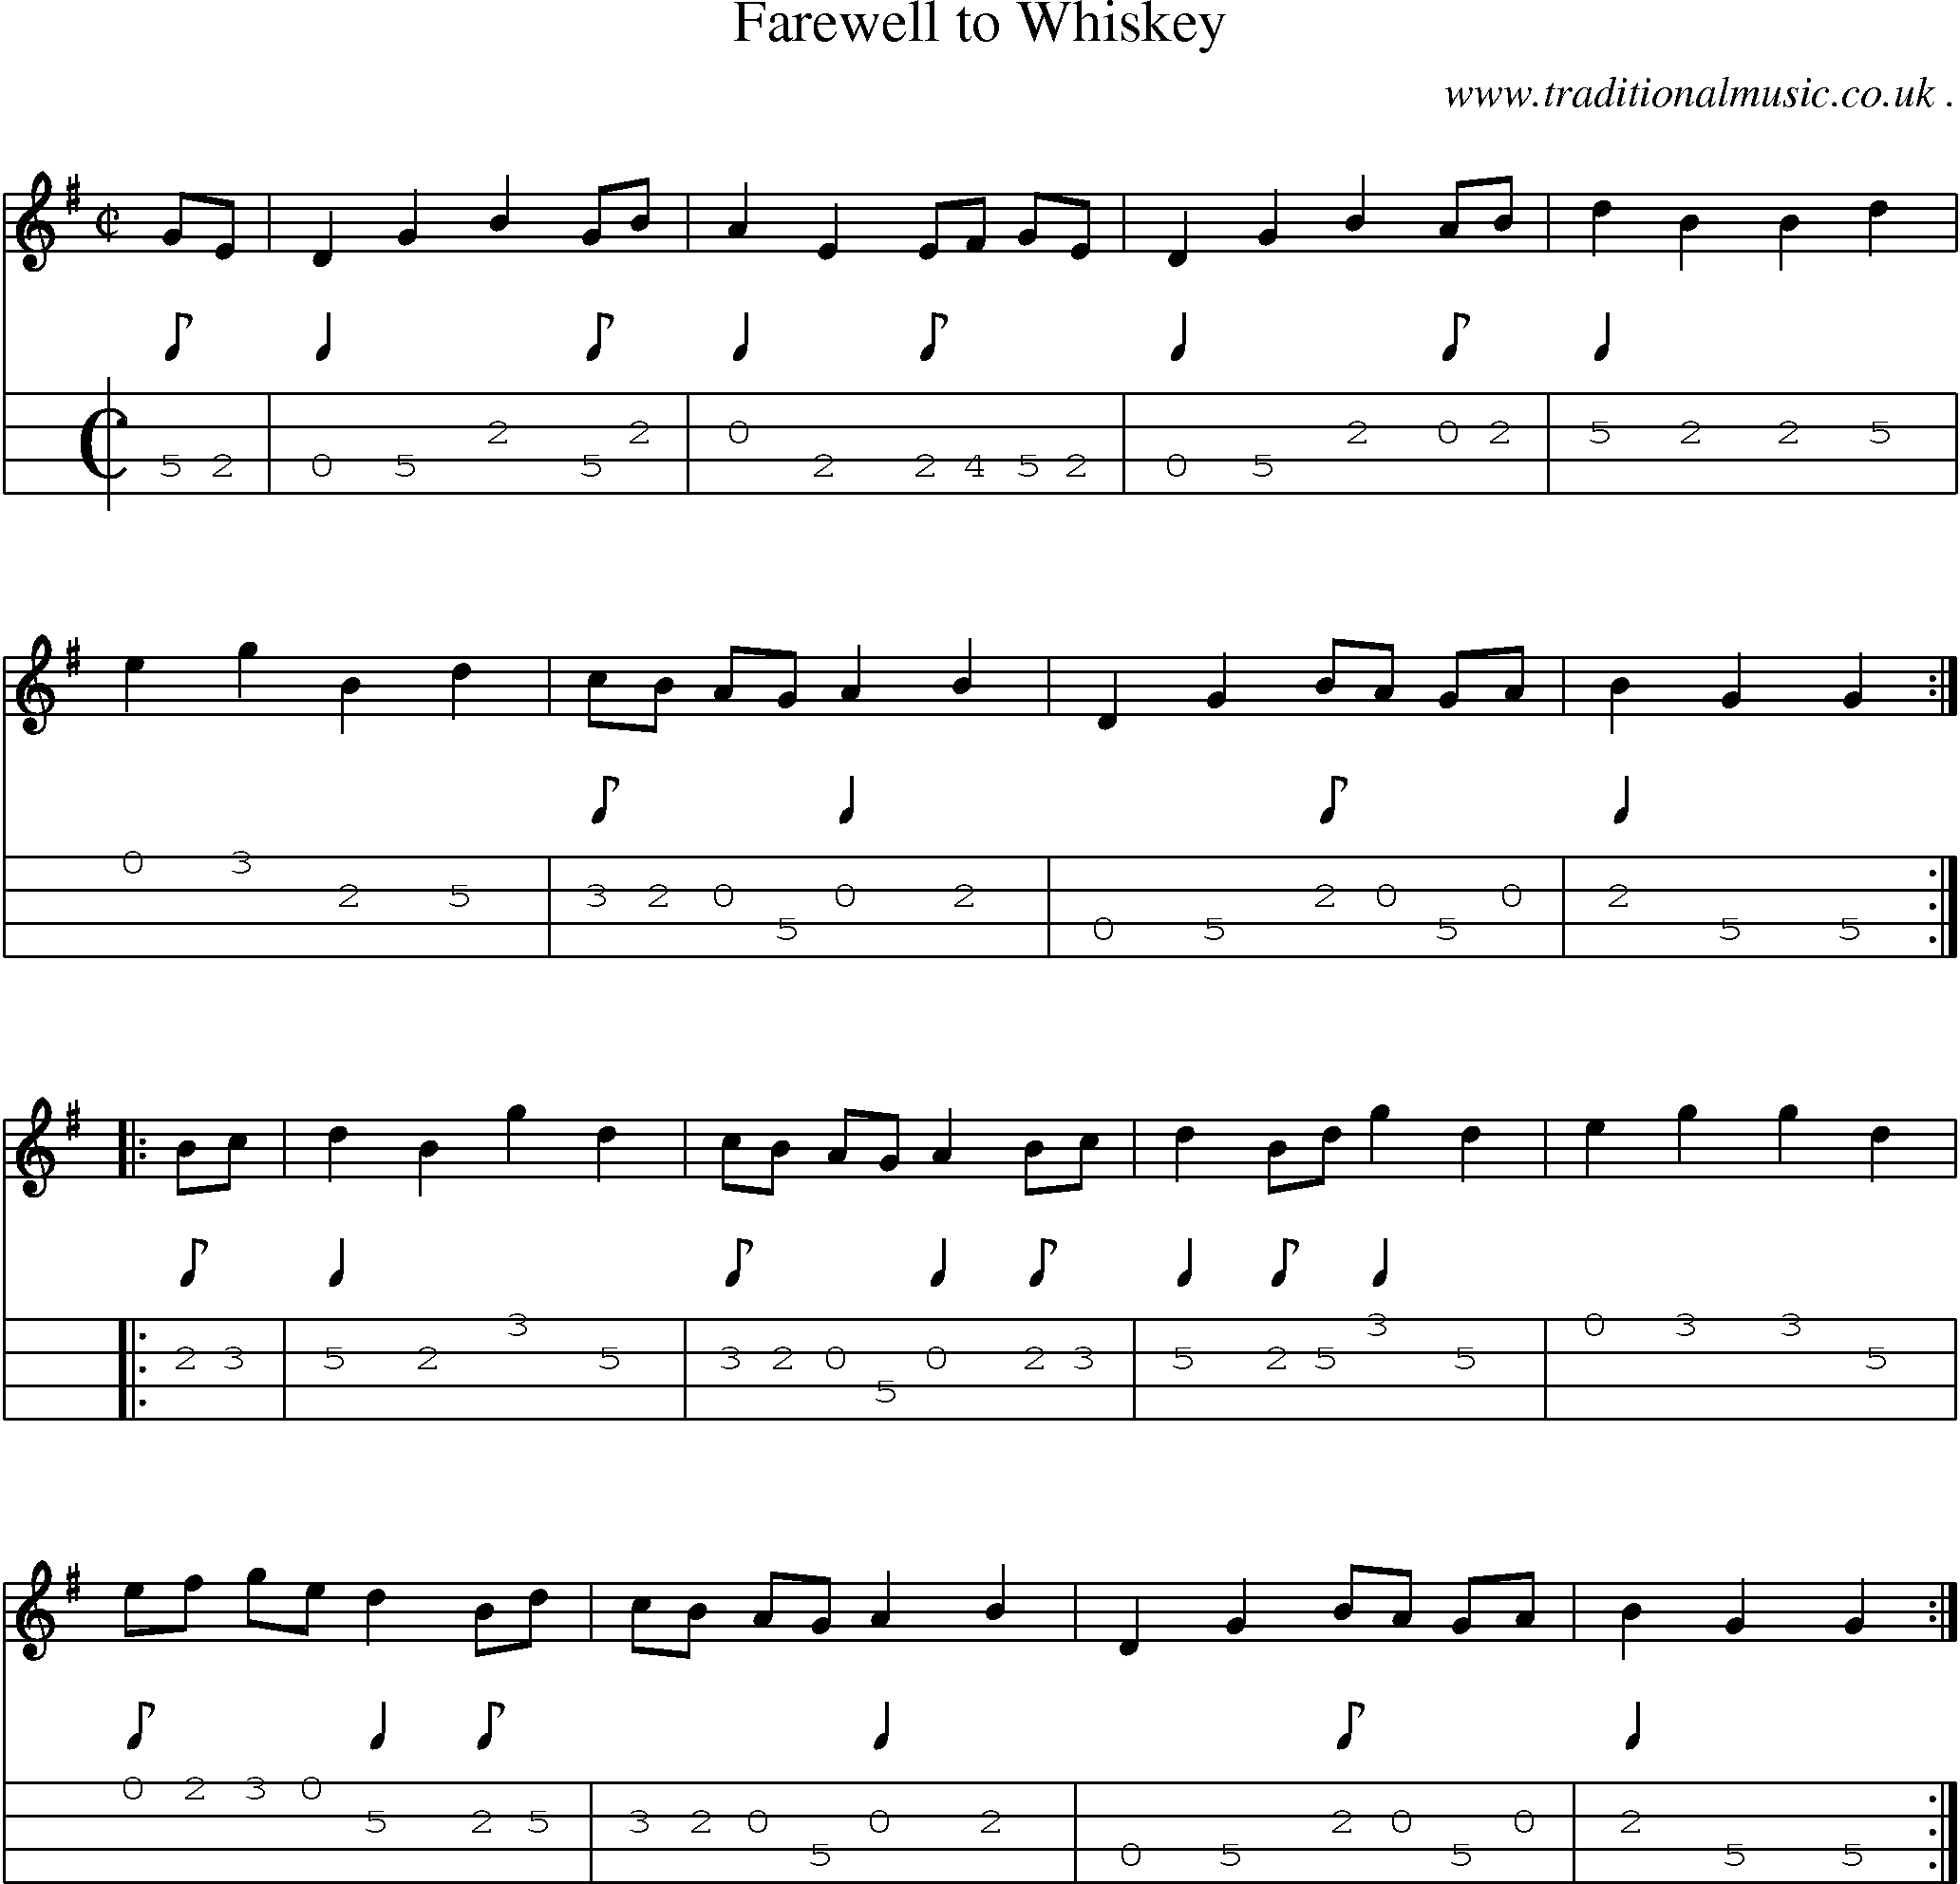 Sheet-music  score, Chords and Mandolin Tabs for Farewell To Whiskey